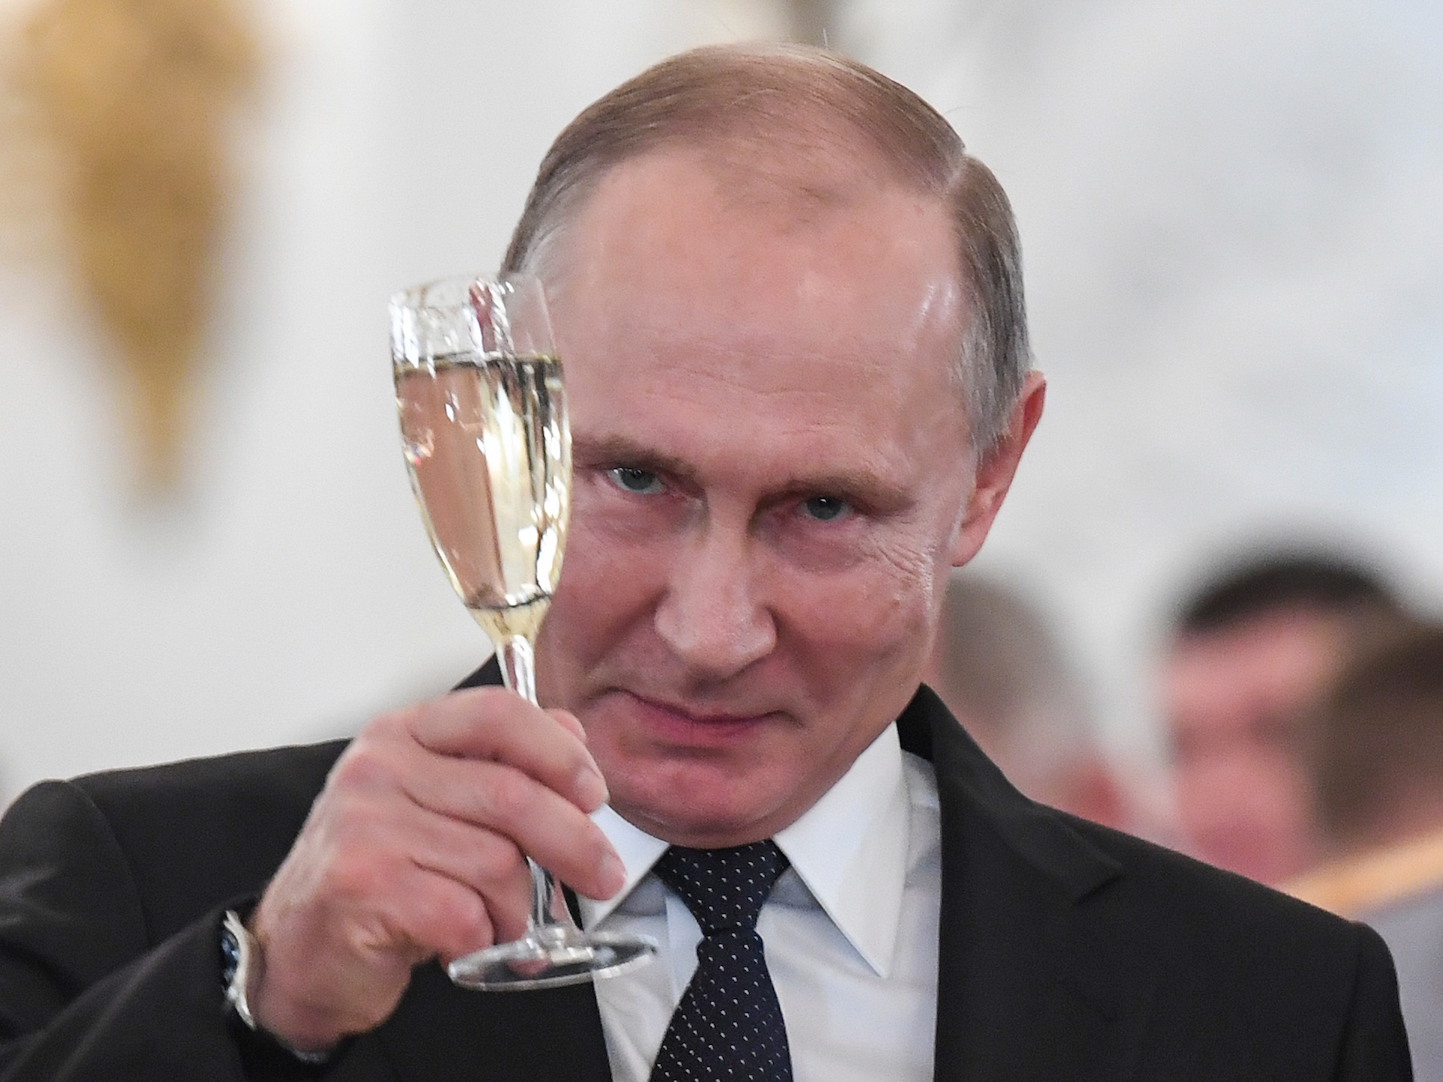 the-25-richest-russian-oligarchs-on-the-putin-list-that-the-us-just-released.jpg